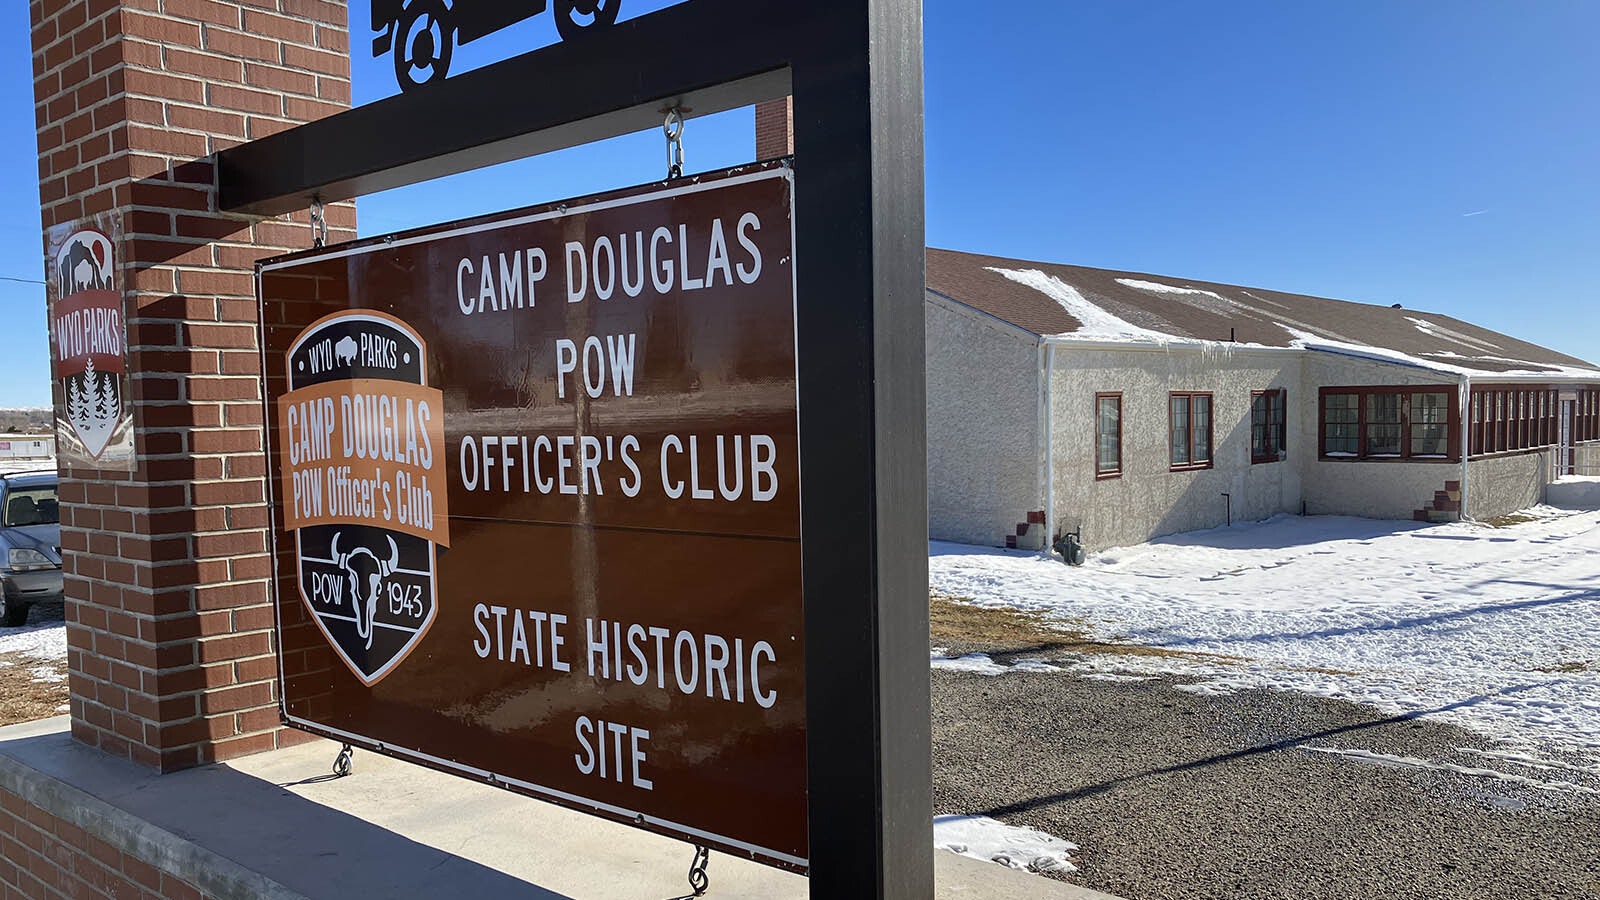 The former camp location is an official state-designated historic site.